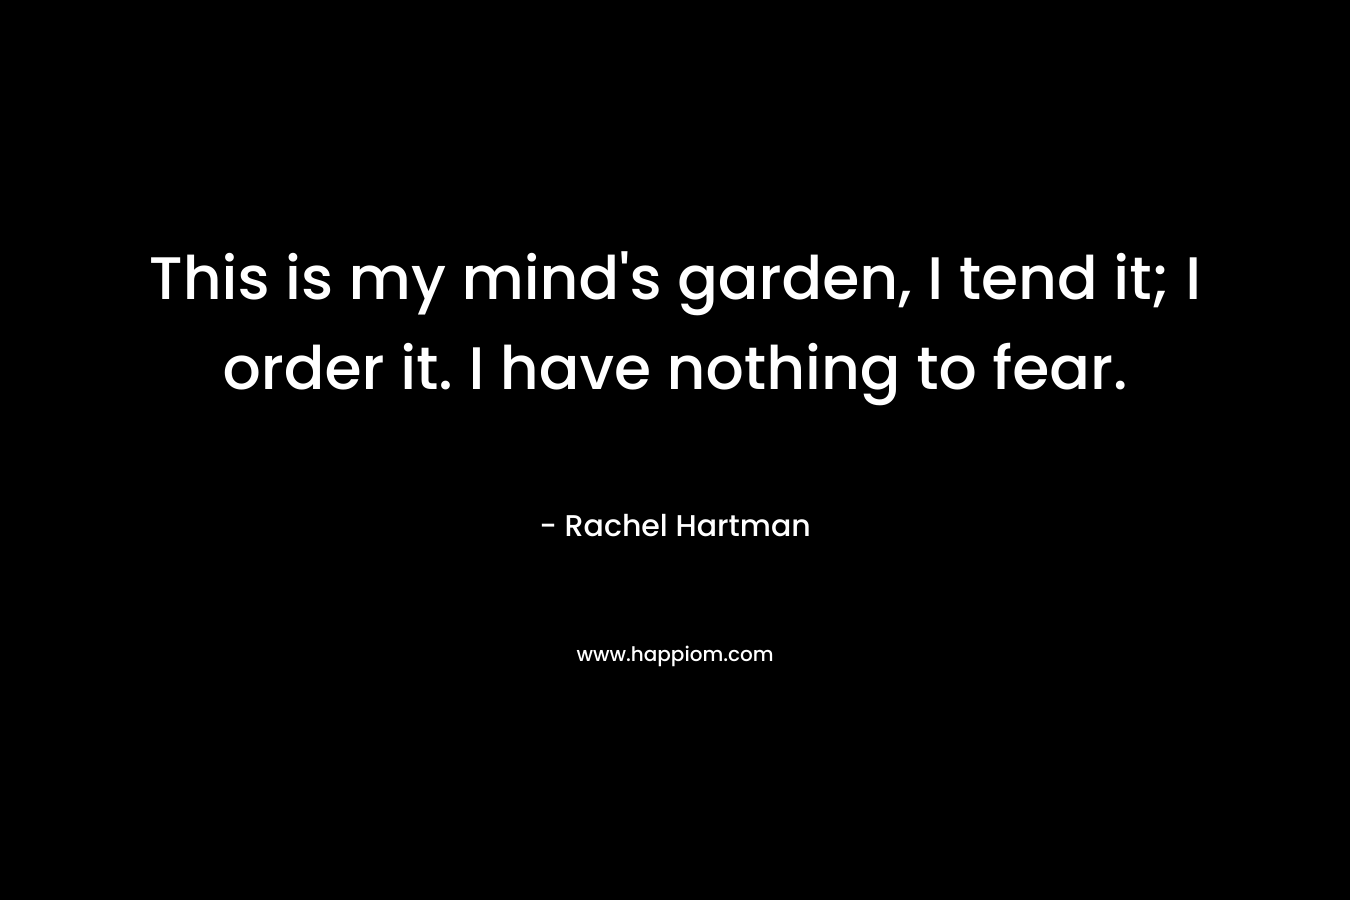 This is my mind's garden, I tend it; I order it. I have nothing to fear.